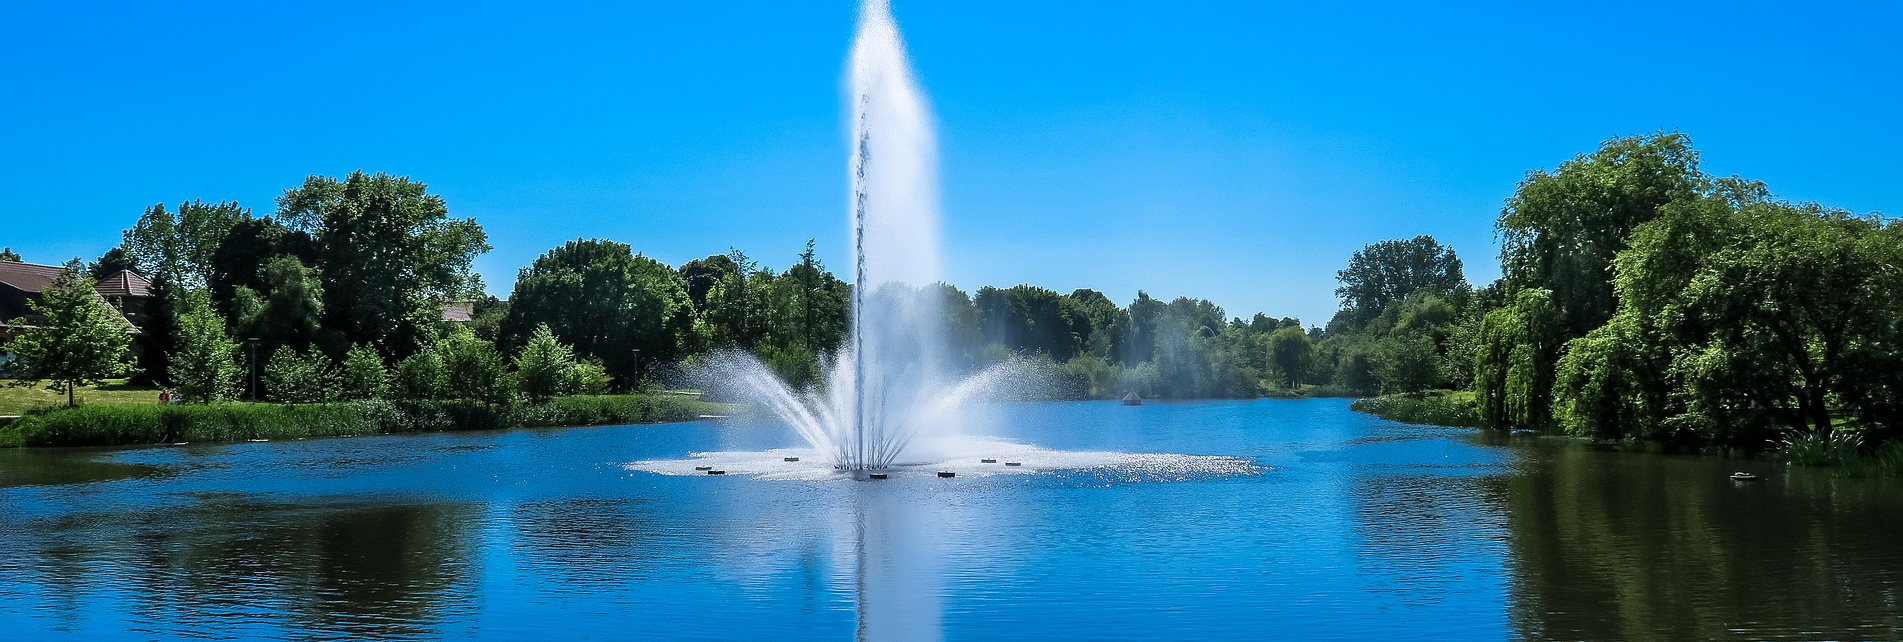 The Lake Doctor - lake management floating fountains Dallas Fort Worth Texas - Lake Management Company - Floating Fountains Aeration Systems Vegetation Control Fish Fish Feeders Installation & Design Allen Texas